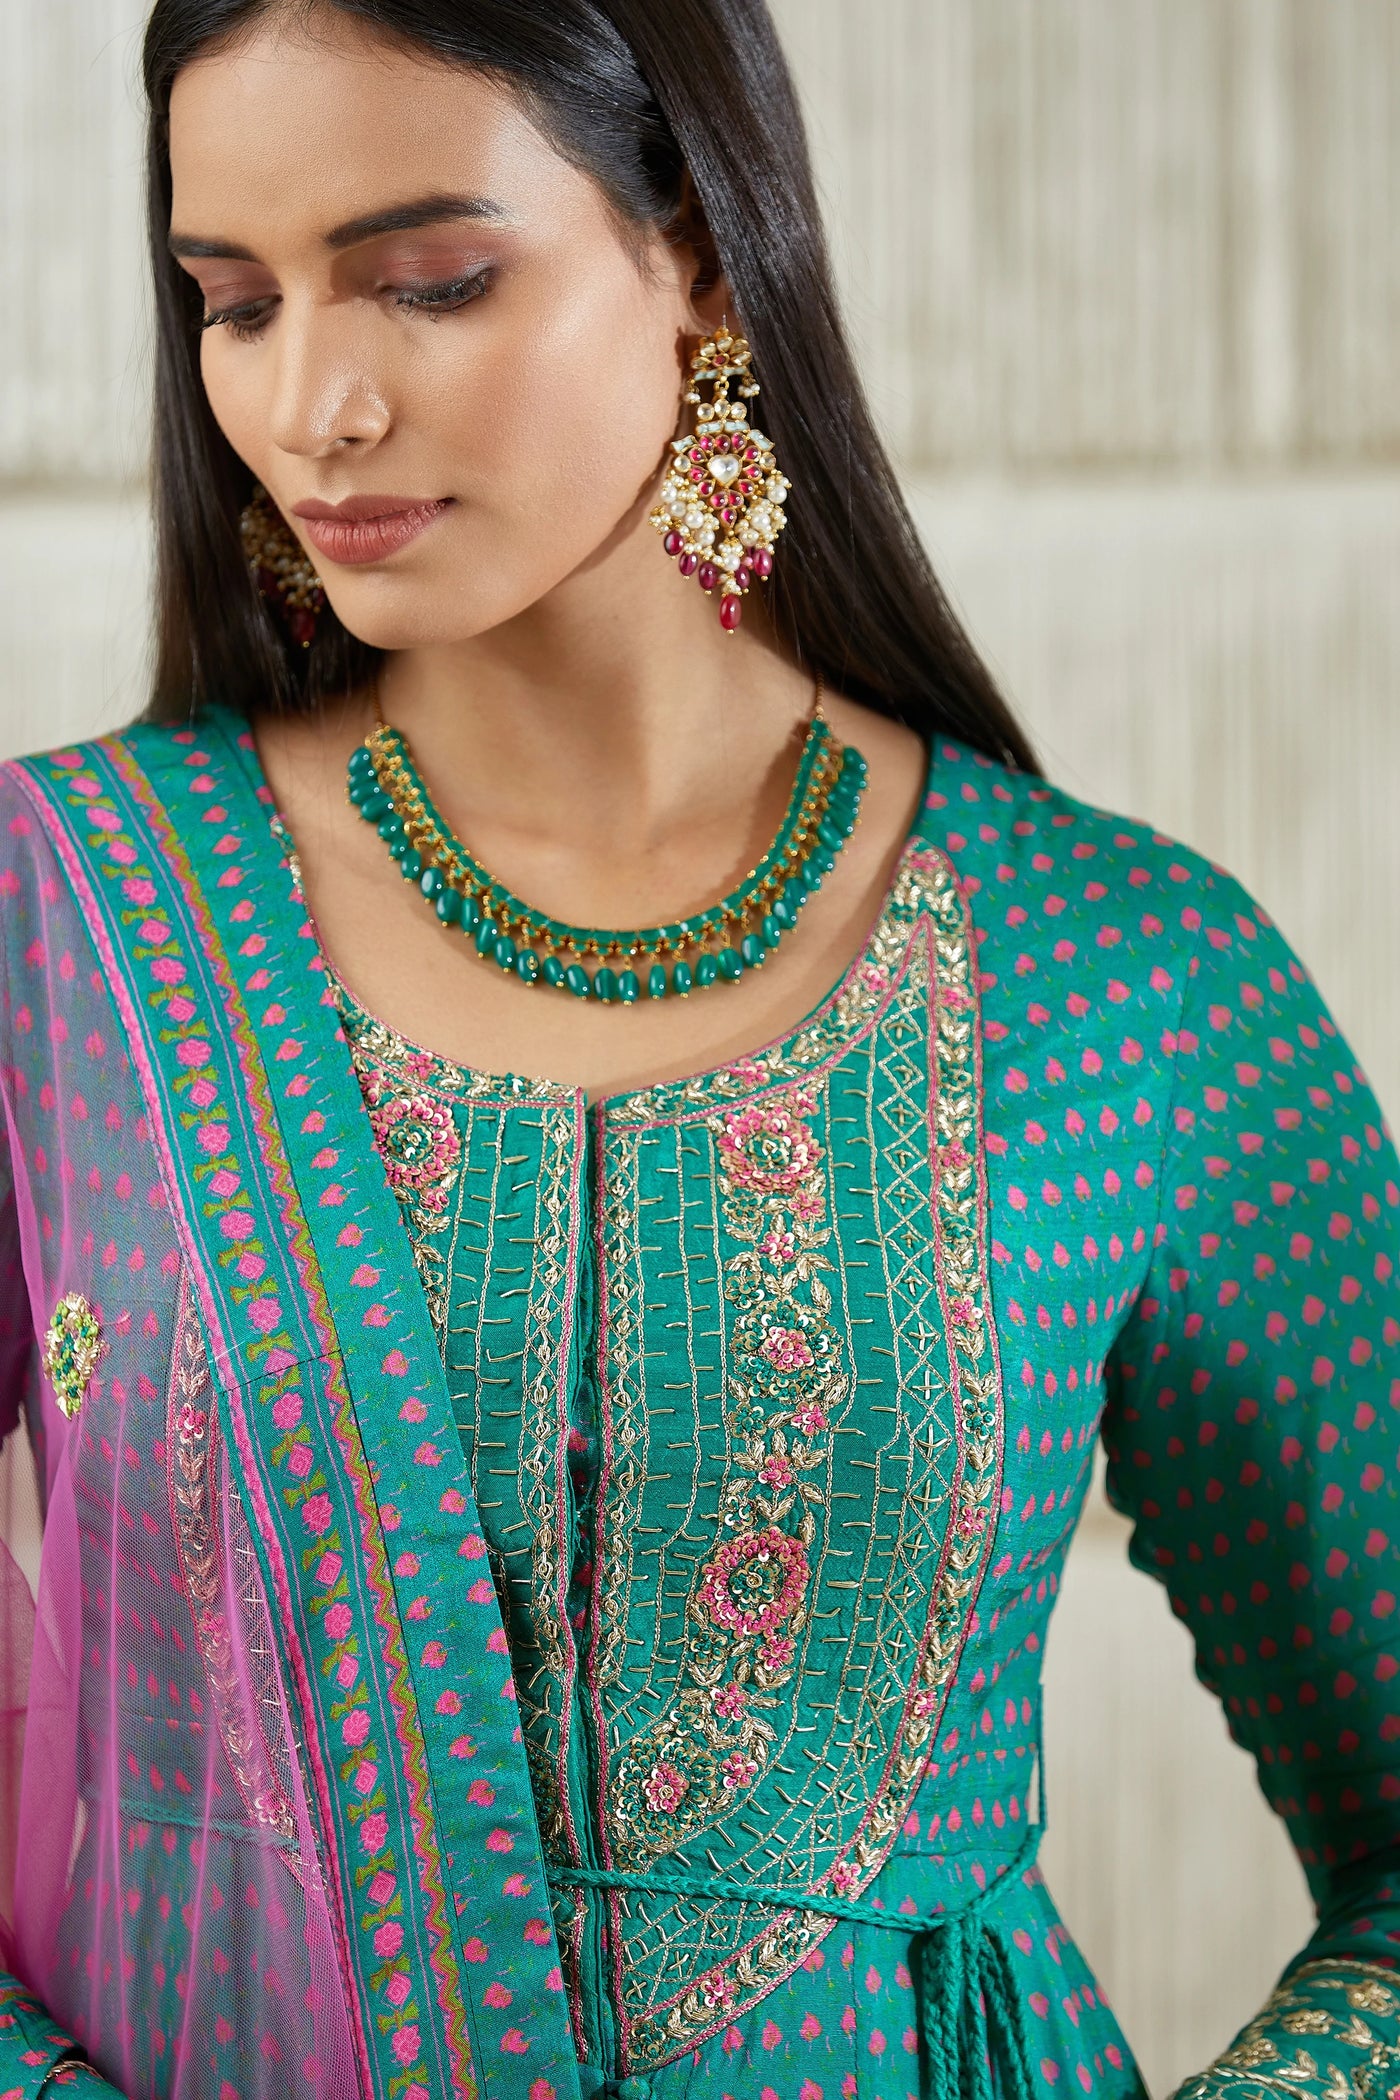 Teal Zardozi Anarkali Set Indian Clothing in Denver, CO, Aurora, CO, Boulder, CO, Fort Collins, CO, Colorado Springs, CO, Parker, CO, Highlands Ranch, CO, Cherry Creek, CO, Centennial, CO, and Longmont, CO. NATIONWIDE SHIPPING USA- India Fashion X